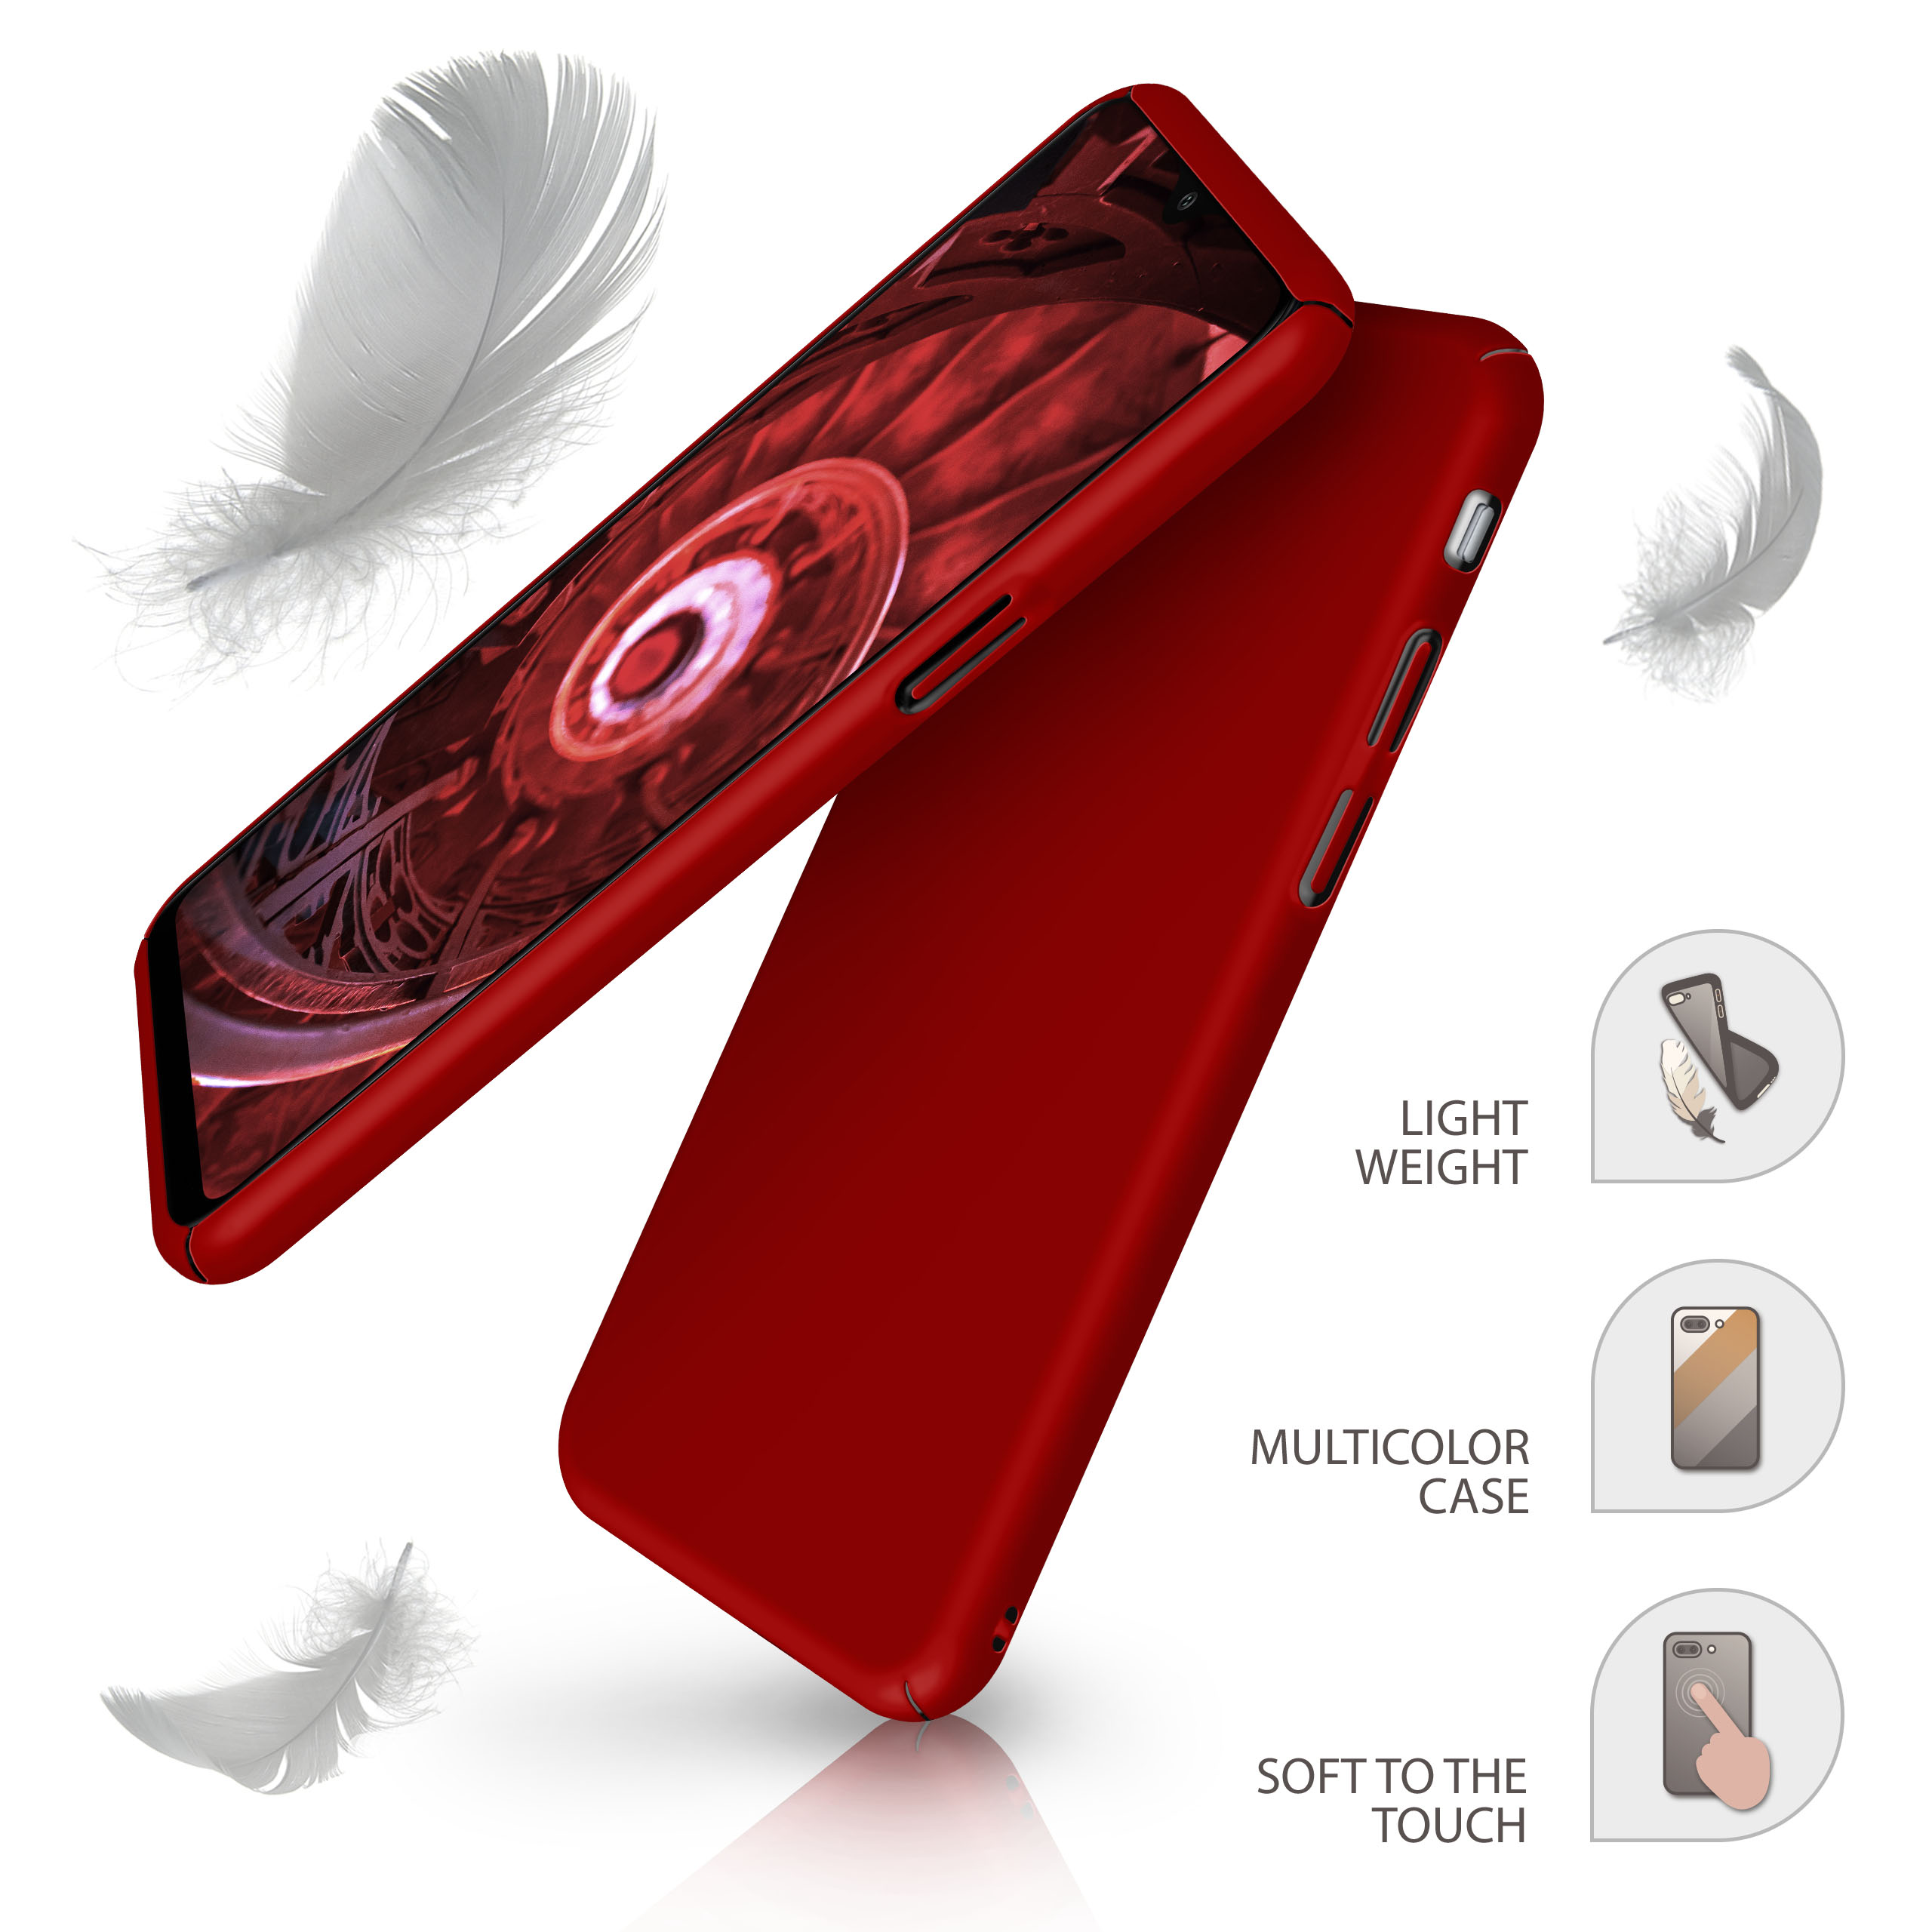 MOEX Alpha Redmi 7S, Rot Note Backcover, 7 Pro 7/ Xiaomi, Case, Note 